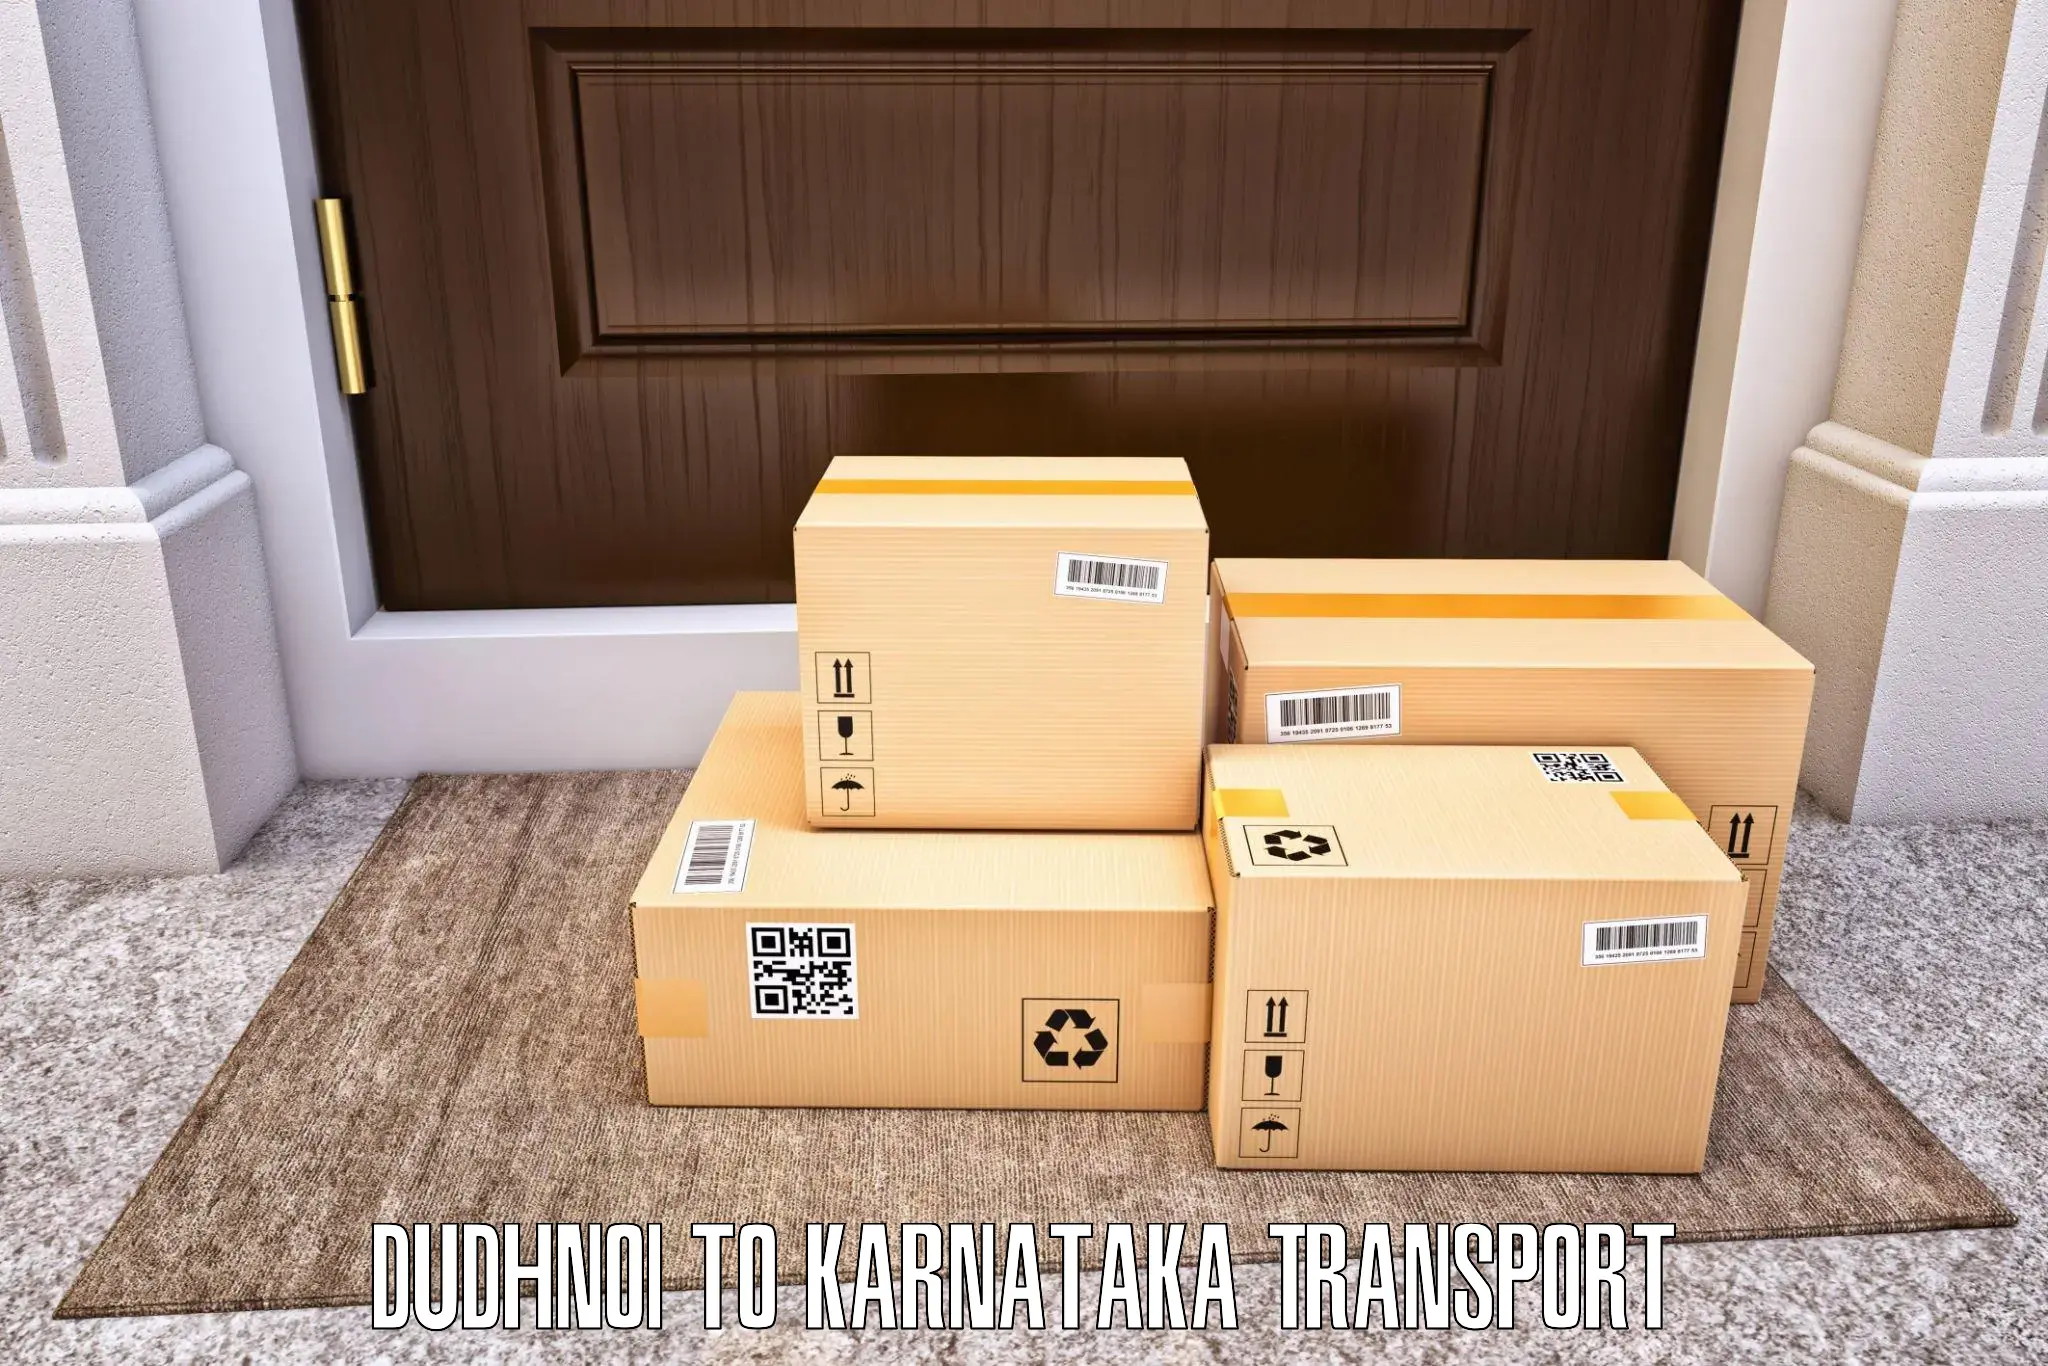 Truck transport companies in India Dudhnoi to Byndoor